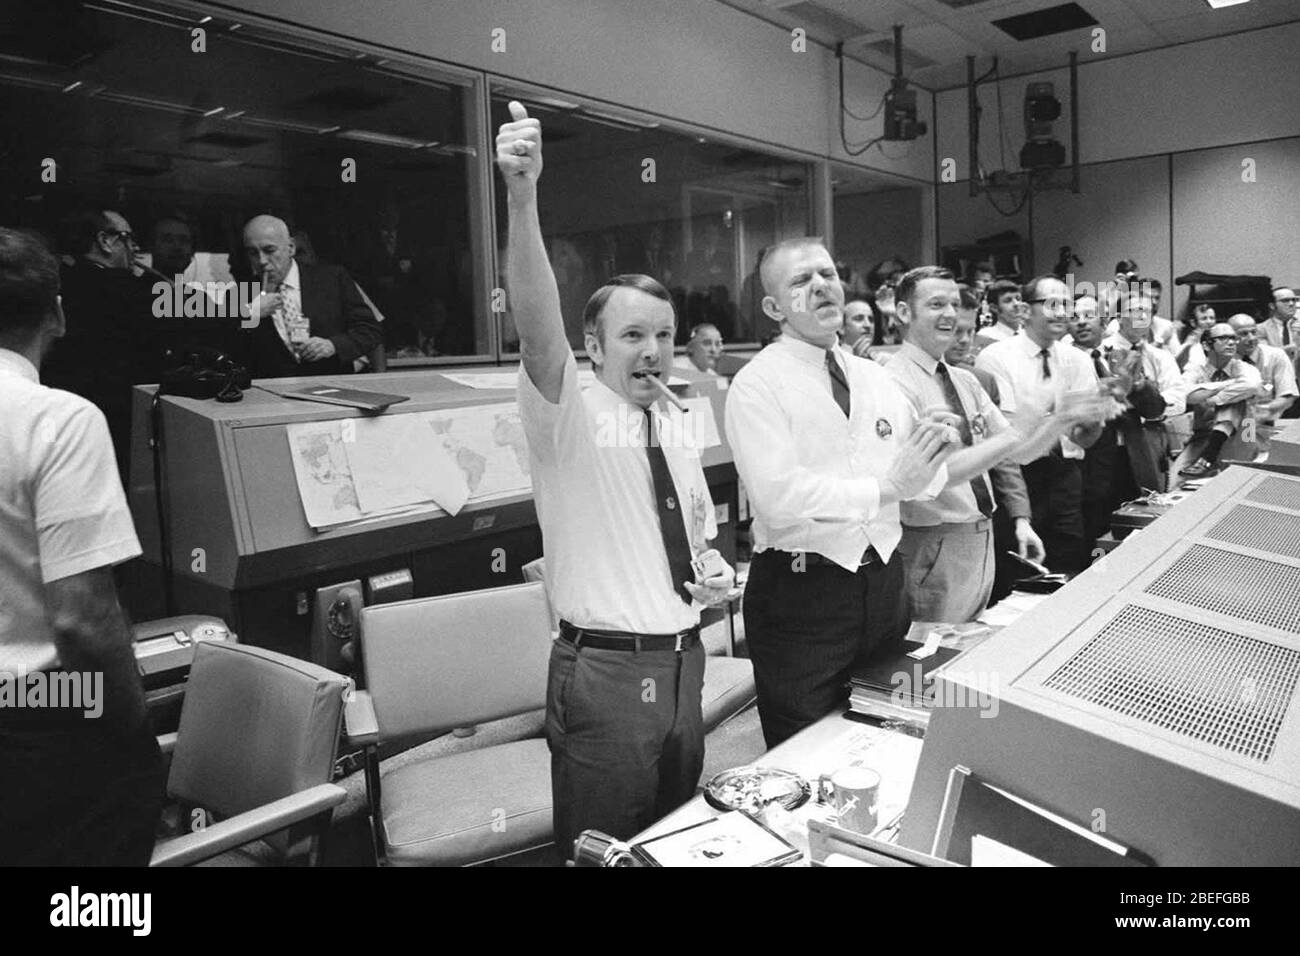 Three of the four Apollo 13 Flight Directors applaud the successful splashdown of the Command Module 'Odyssey.' At the same time, Dr. Robert R. Gilruth, Director, Manned Spacecraft Center (MSC), and Dr. Christopher C. Kraft Jr., MSC Deputy Director, light up cigars (upper left). The Flight Directors are from left to right: Gerald D. Griffin, Eugene F. Kranz, and Glynn S. Lunney. Apollo 13, launched on April 11, 1970, was NASA's third crewed mission to the moon. Two days later, on April 13, while en route to the lunar surface, a fault in the electrical system of one of the Service Module's oxyg Stock Photo